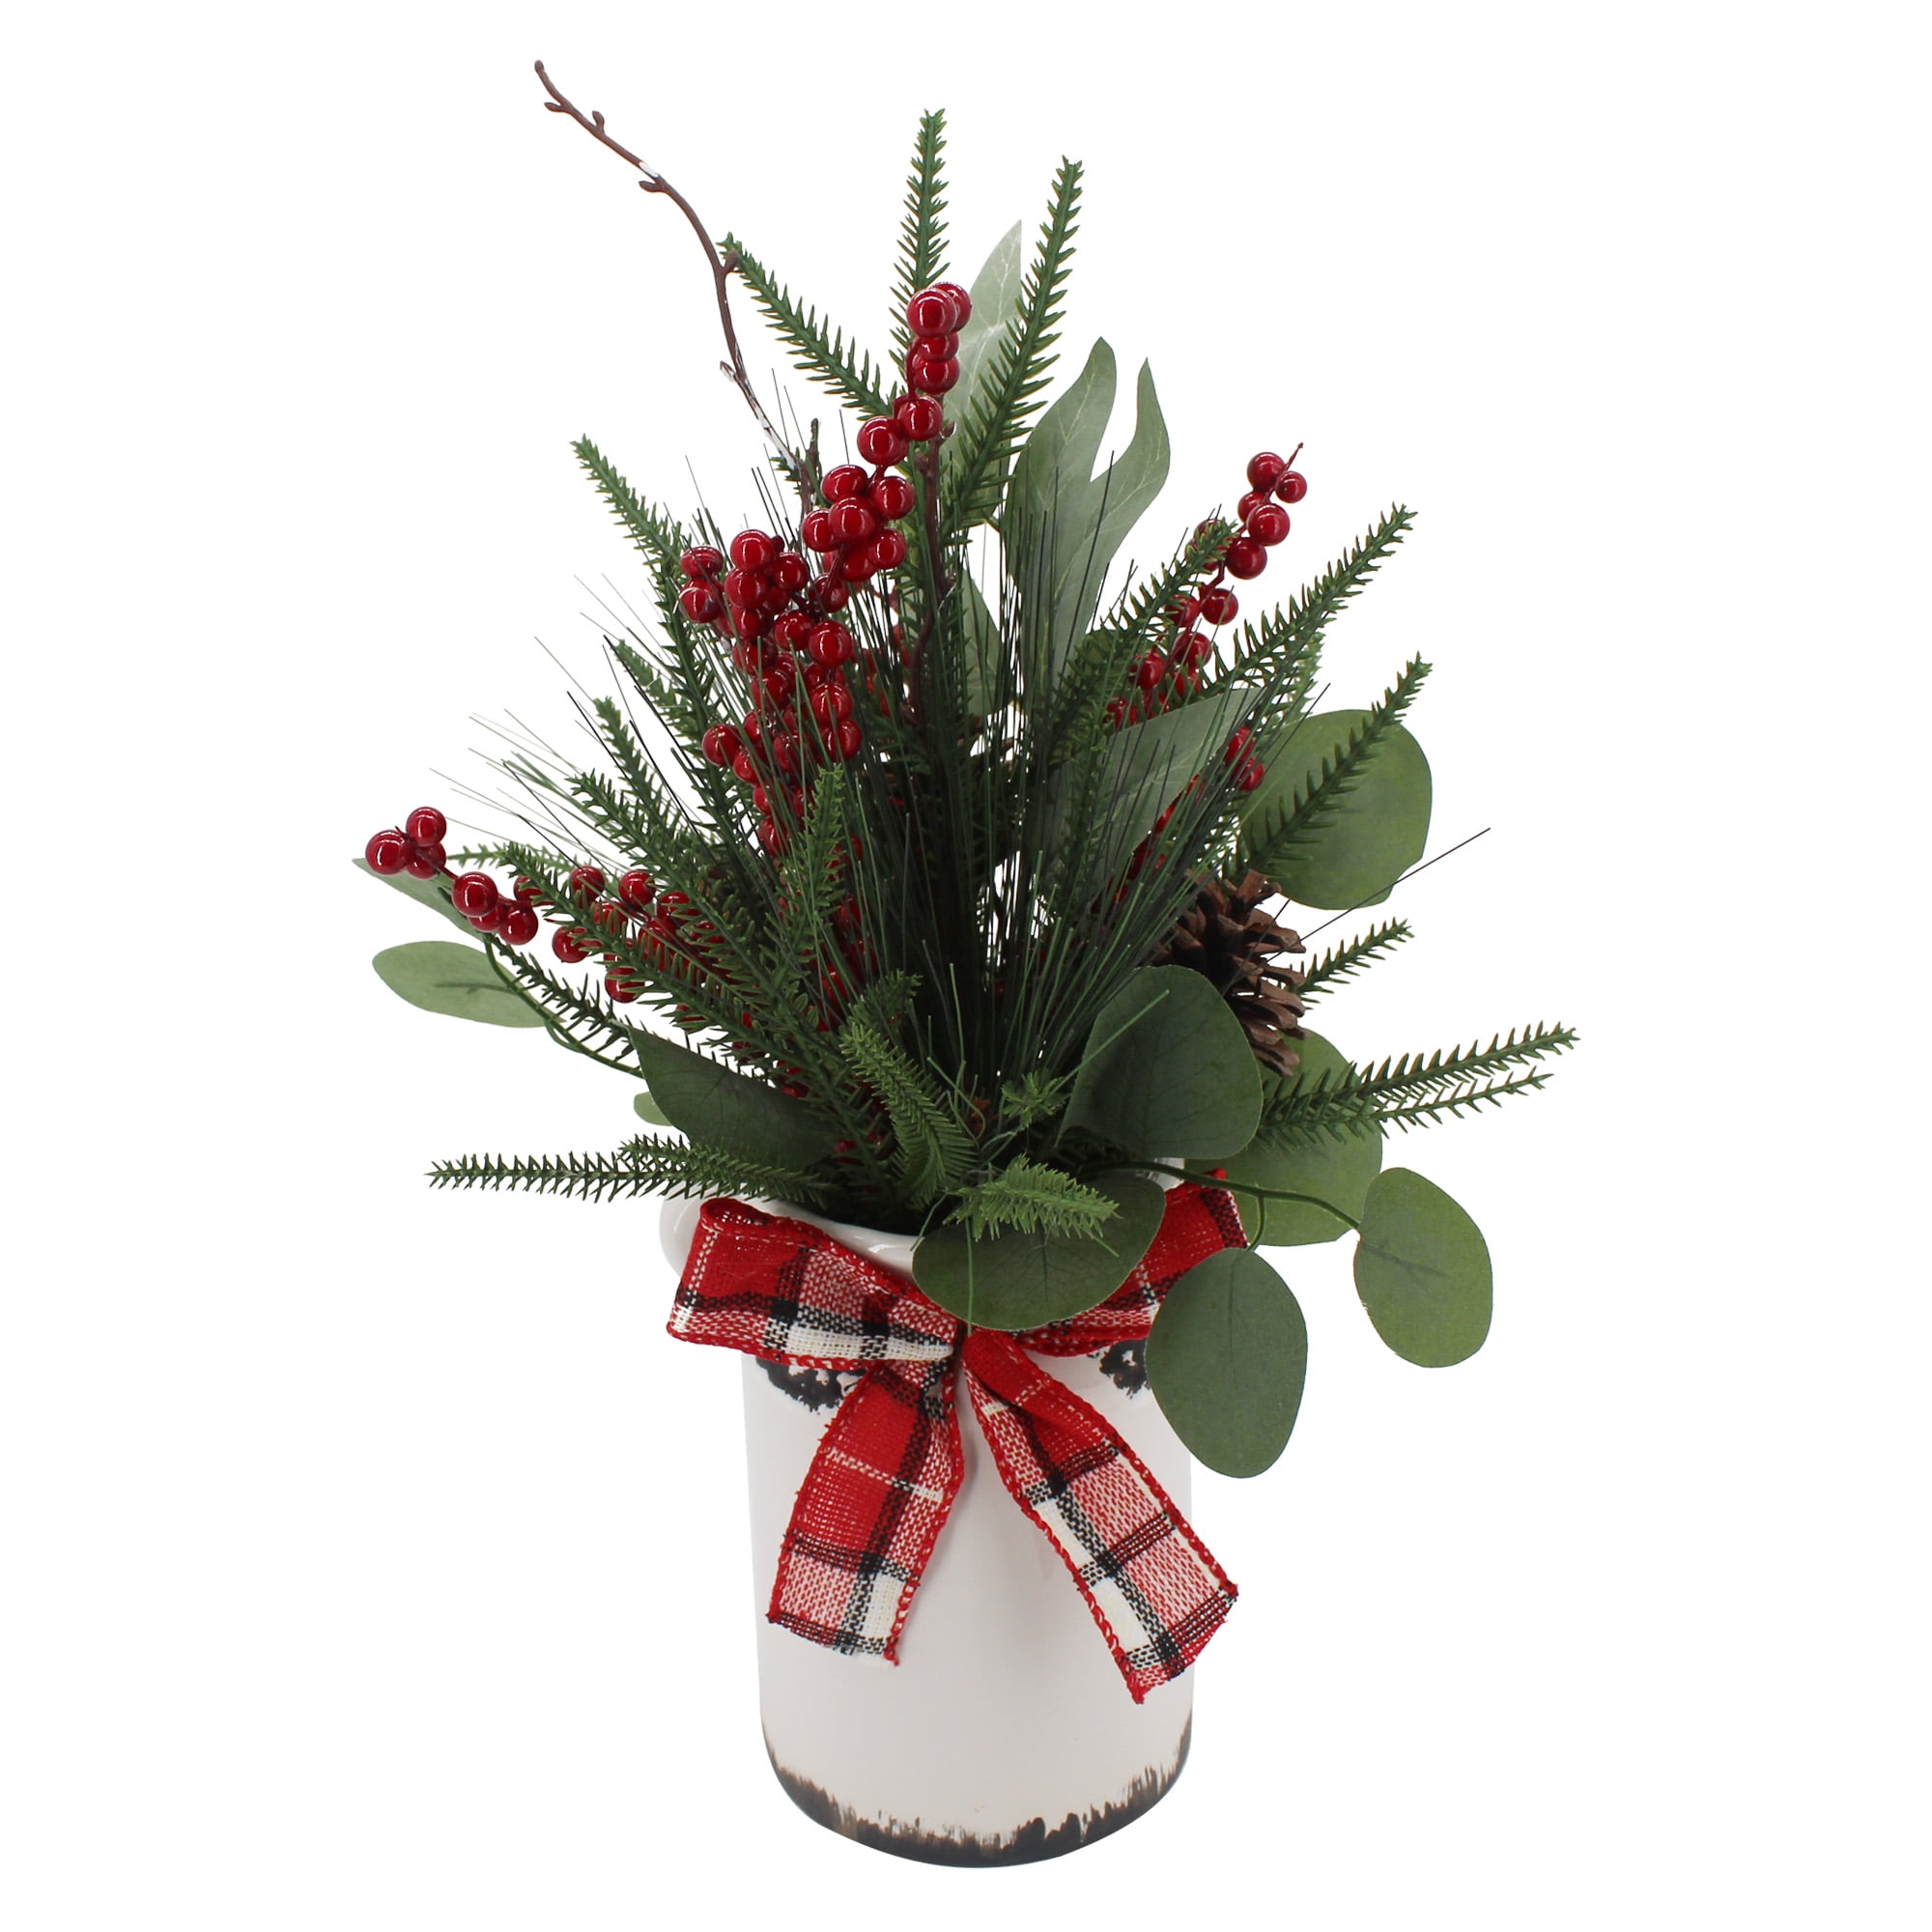 Holiday Time 17” Christmas Artificial Floral Arrangement in White Ceramic Jug, Green